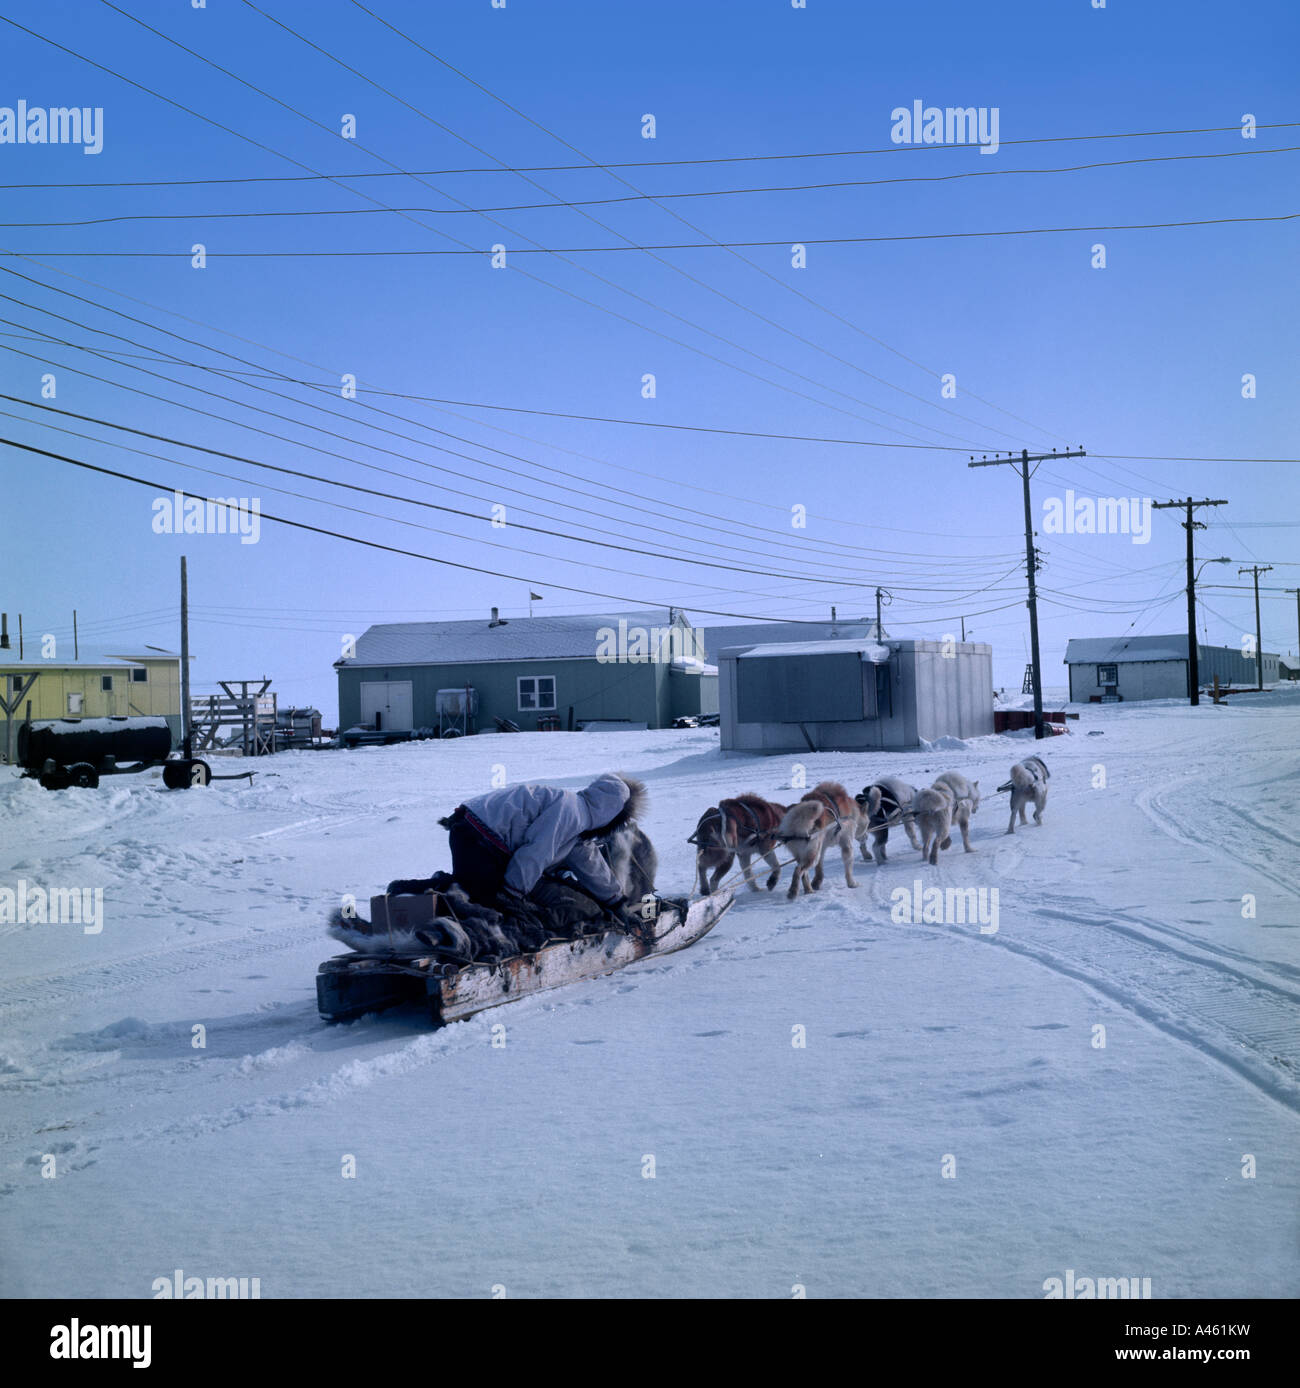 CANADA North West Territory NWT Nunavut Baffin Island Inuit with dog sled in snow by houses Stock Photo